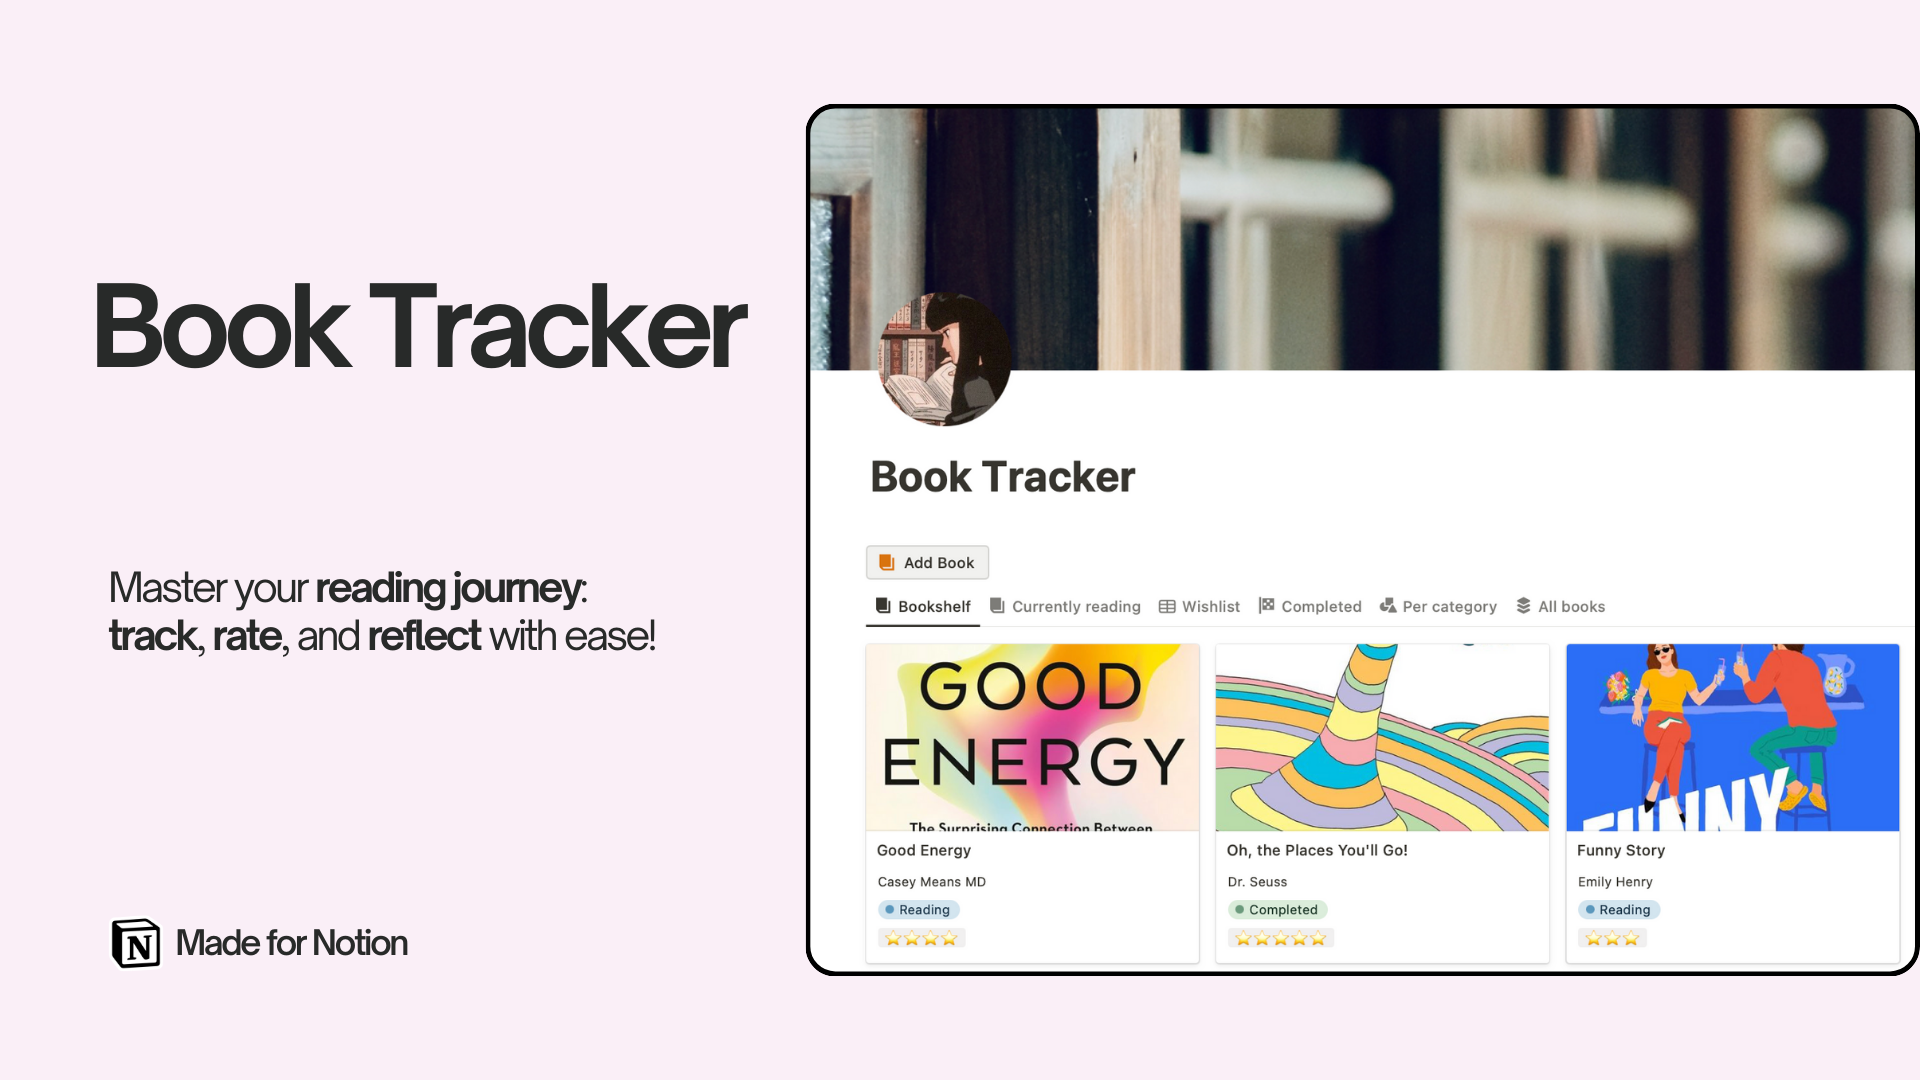 Enhance your reading experience with this Notion Book Tracker. Easily monitor your book collection and reading progress.